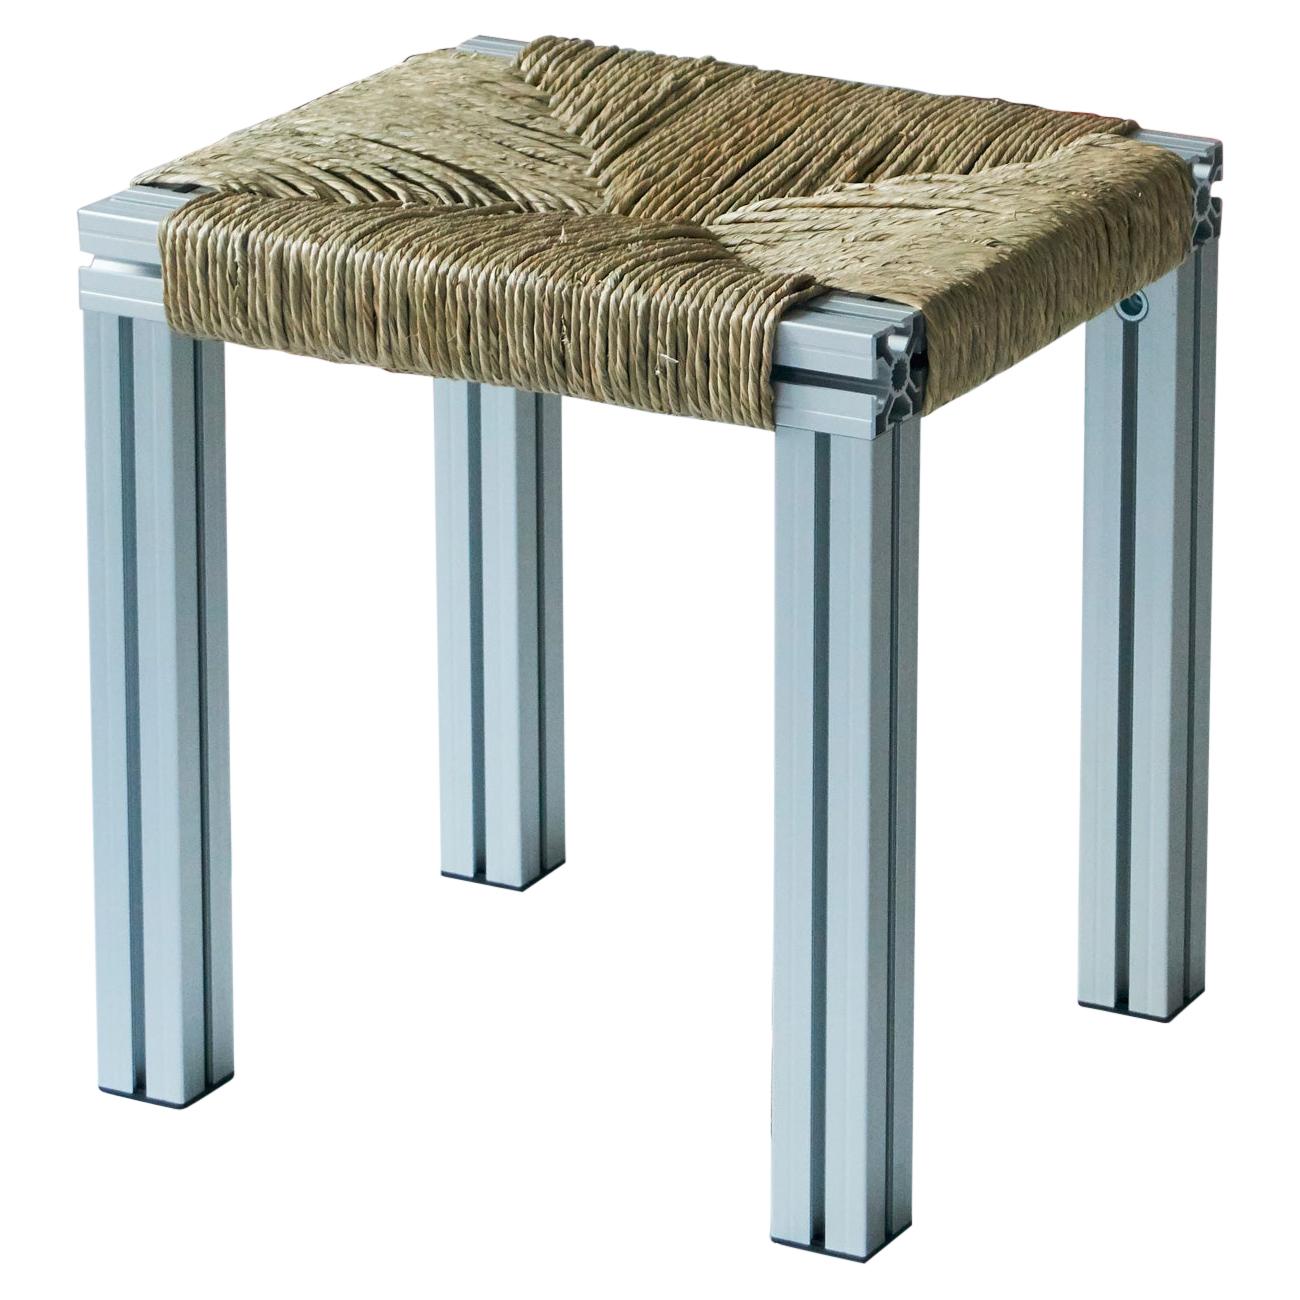 Grey Aluminium Stool with Reel Rush Seating from Anodised Wicker Collection